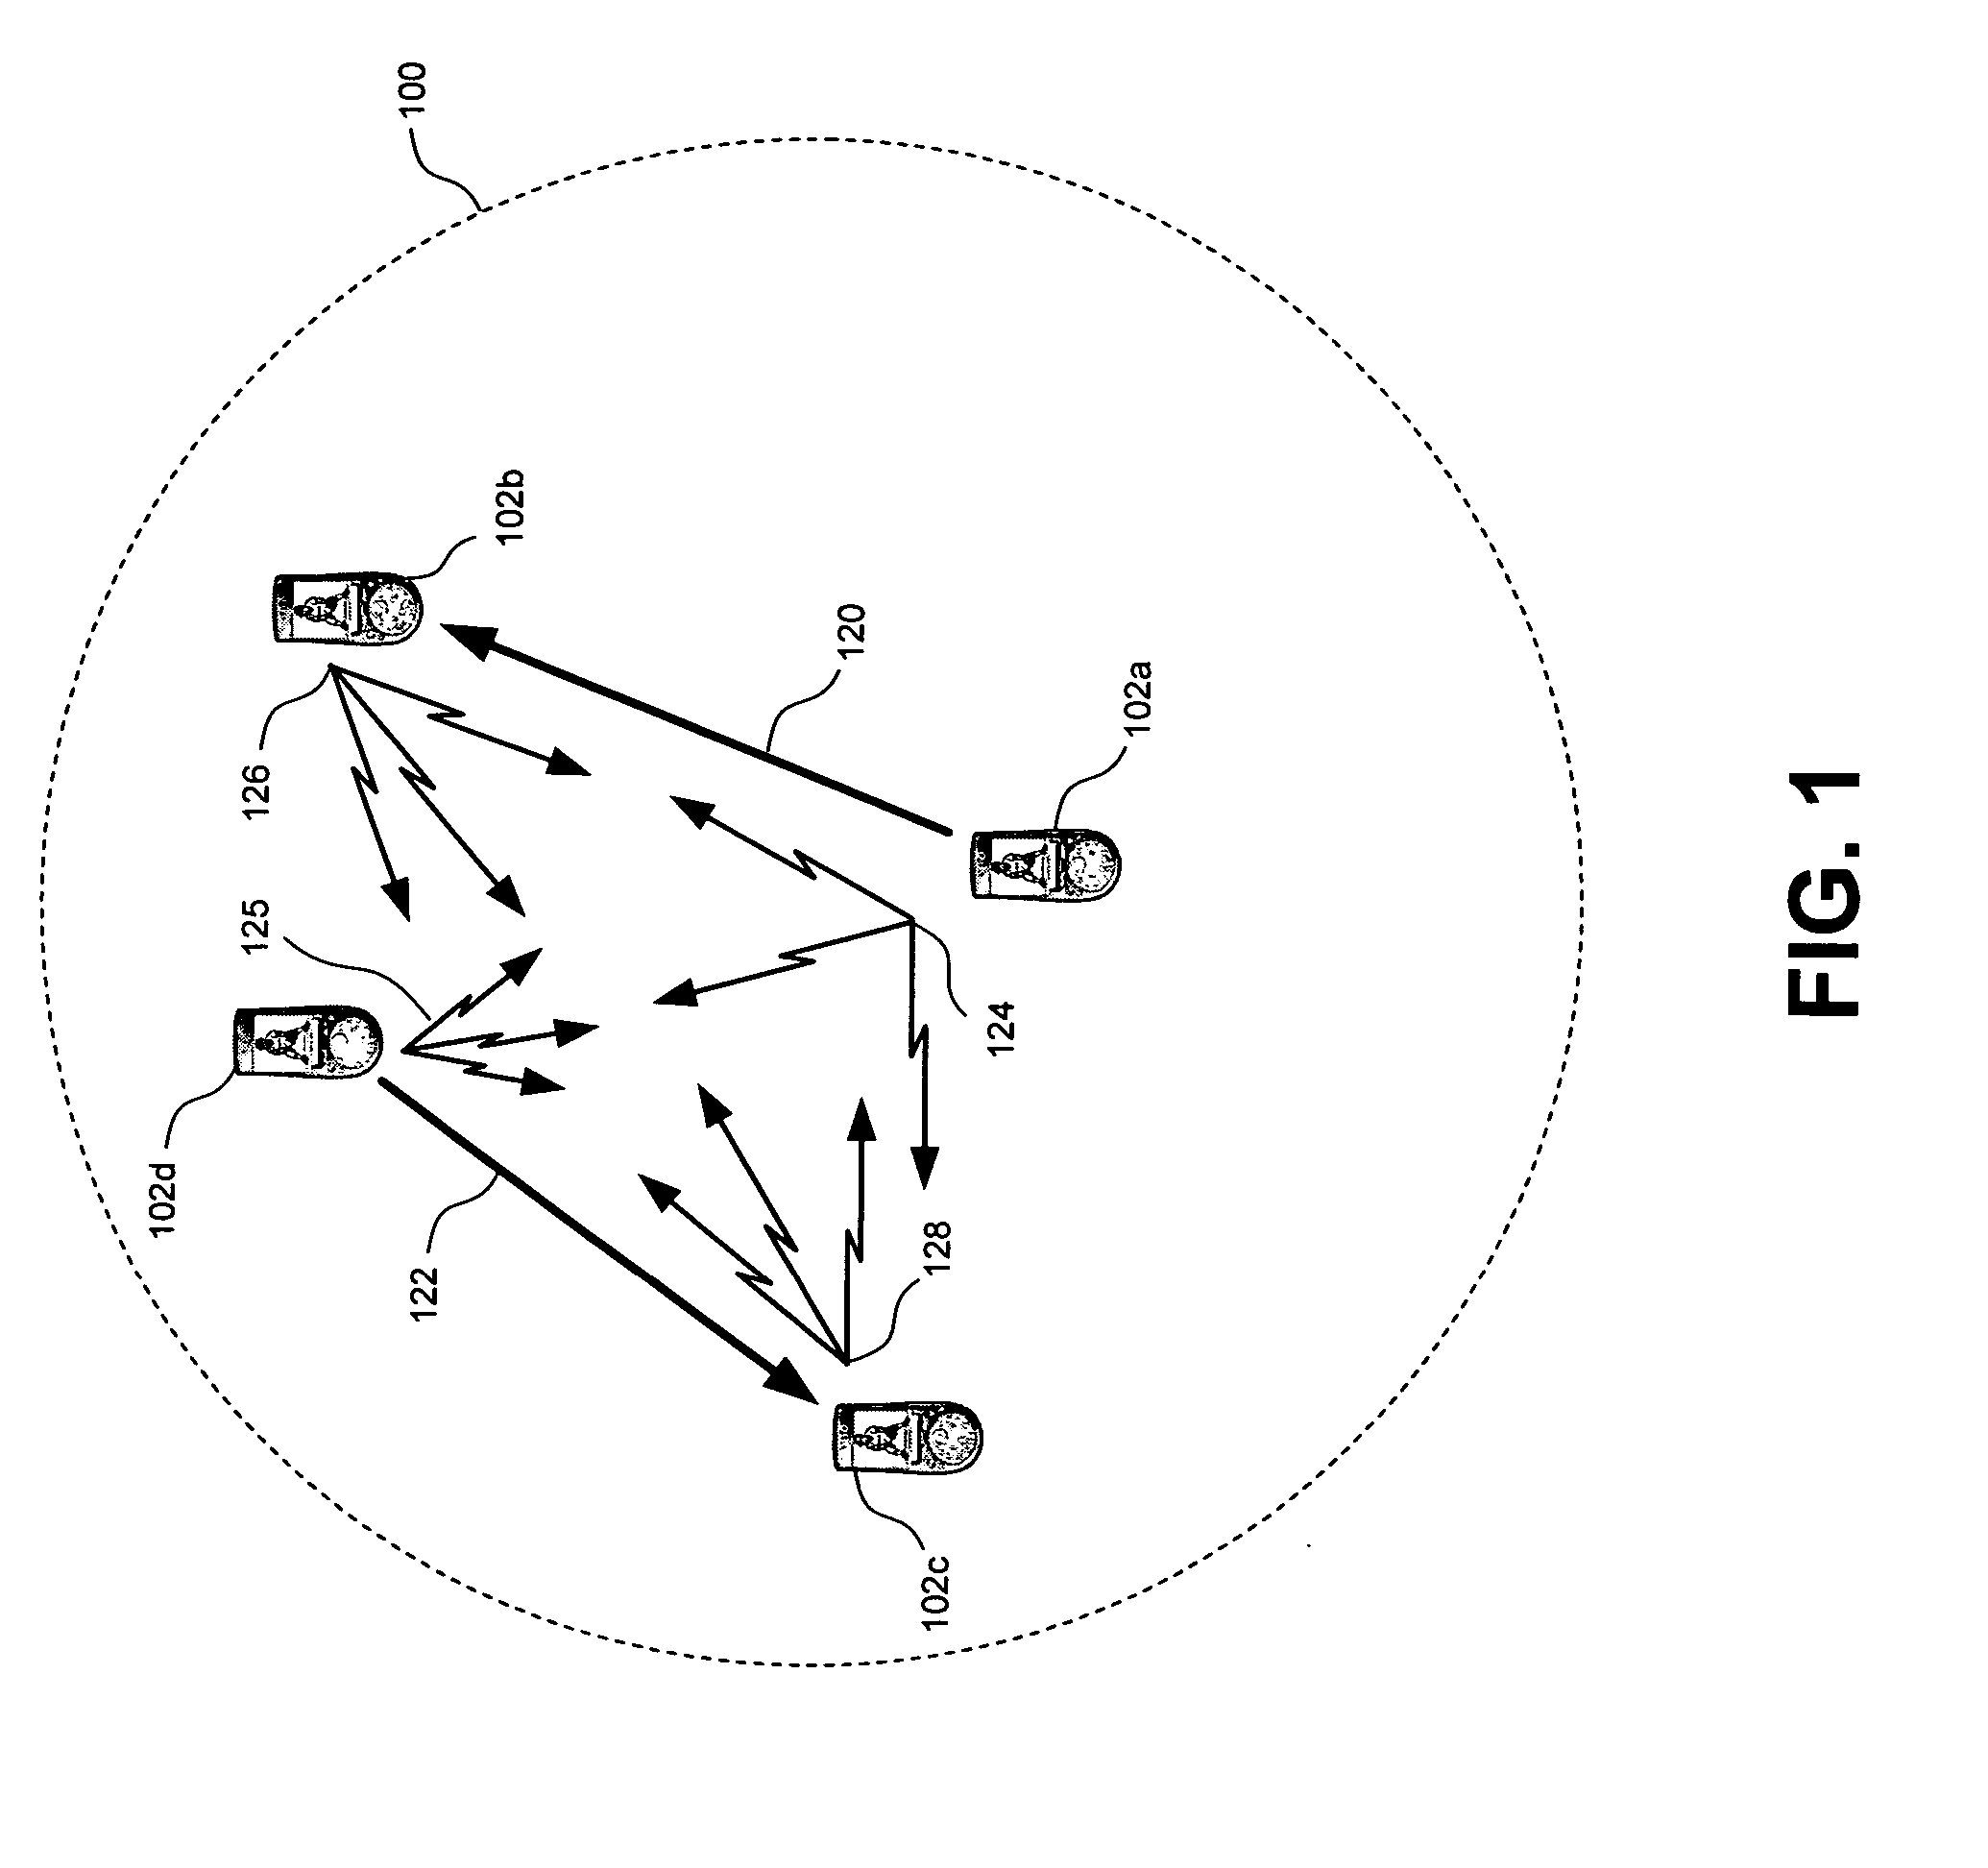 Channel change procedures in a wireless communications network